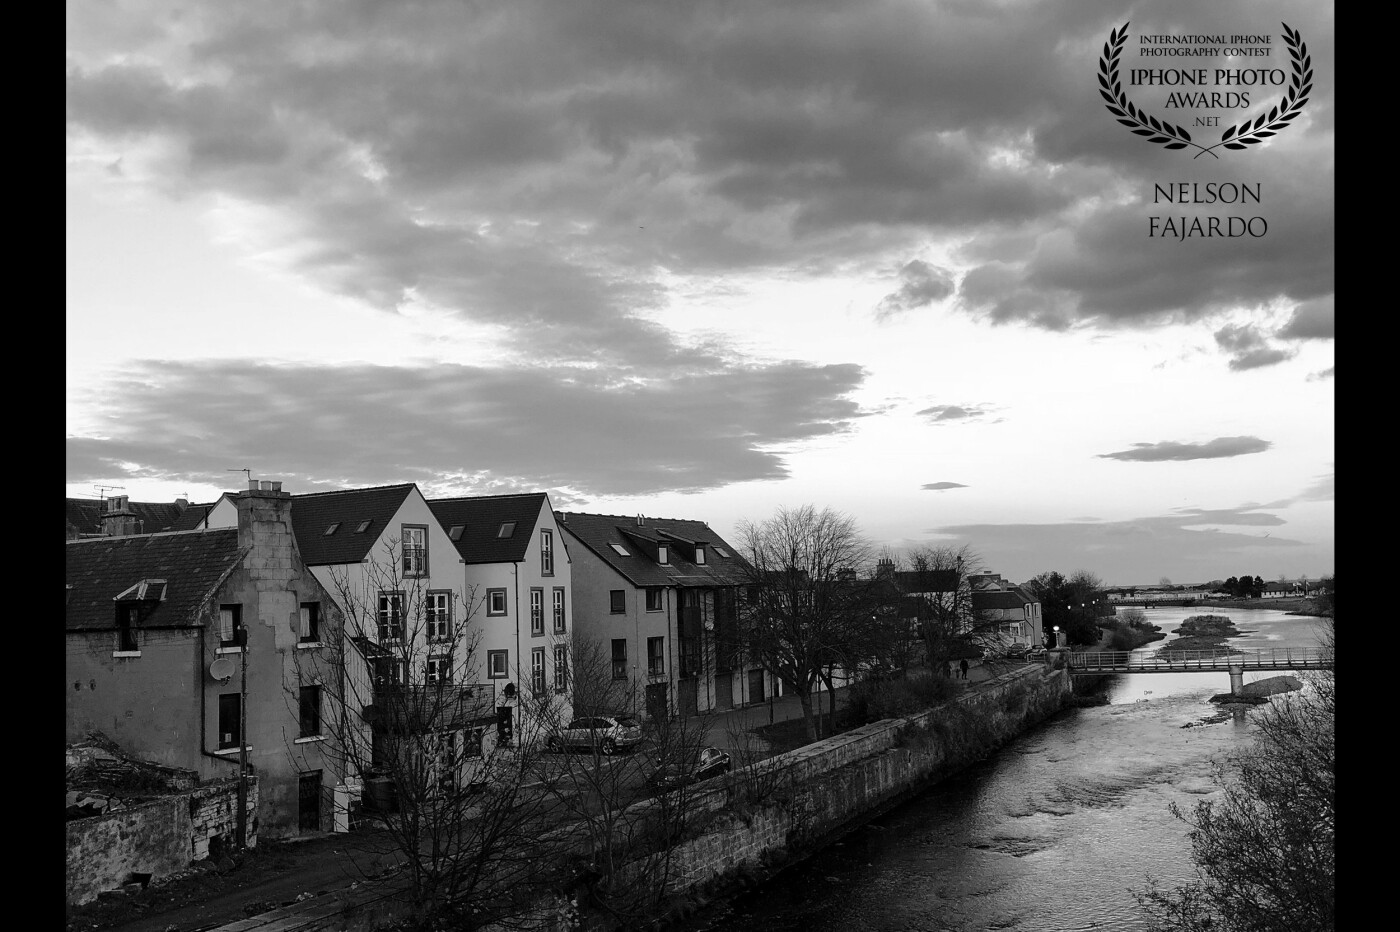 A stroll after dinner with some drizzle by the River Nairn along Harbour street on one autumn late afternoon. I thought it would be nice to put it in black and white for a better compliment of the shot.